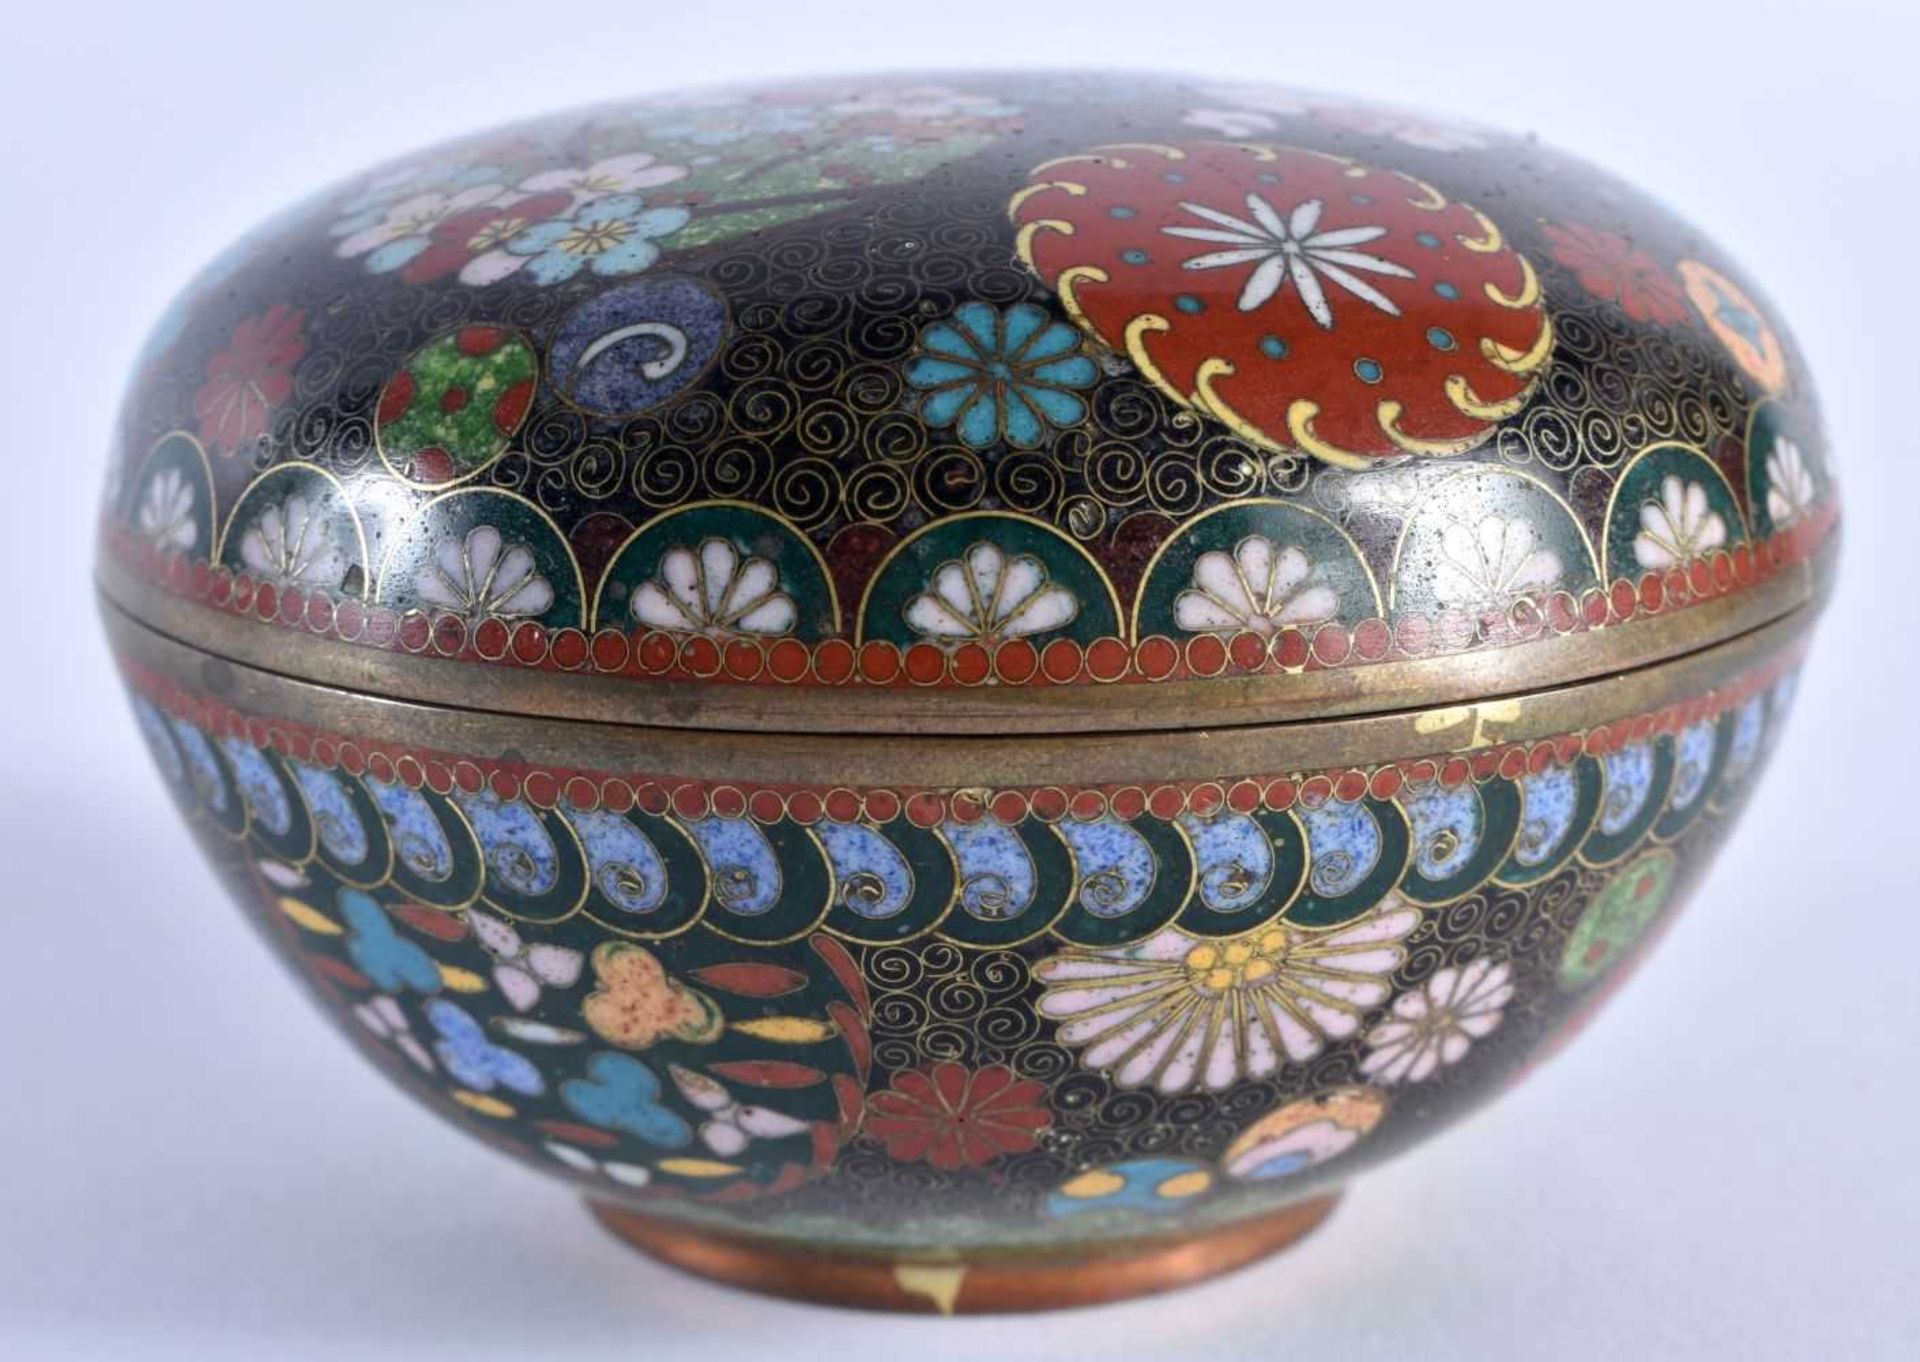 A 19TH CENTURY JAPANESE MEIJI PERIOD CLOISONNE ENAMEL BOX AND COVER decorated all over with floral